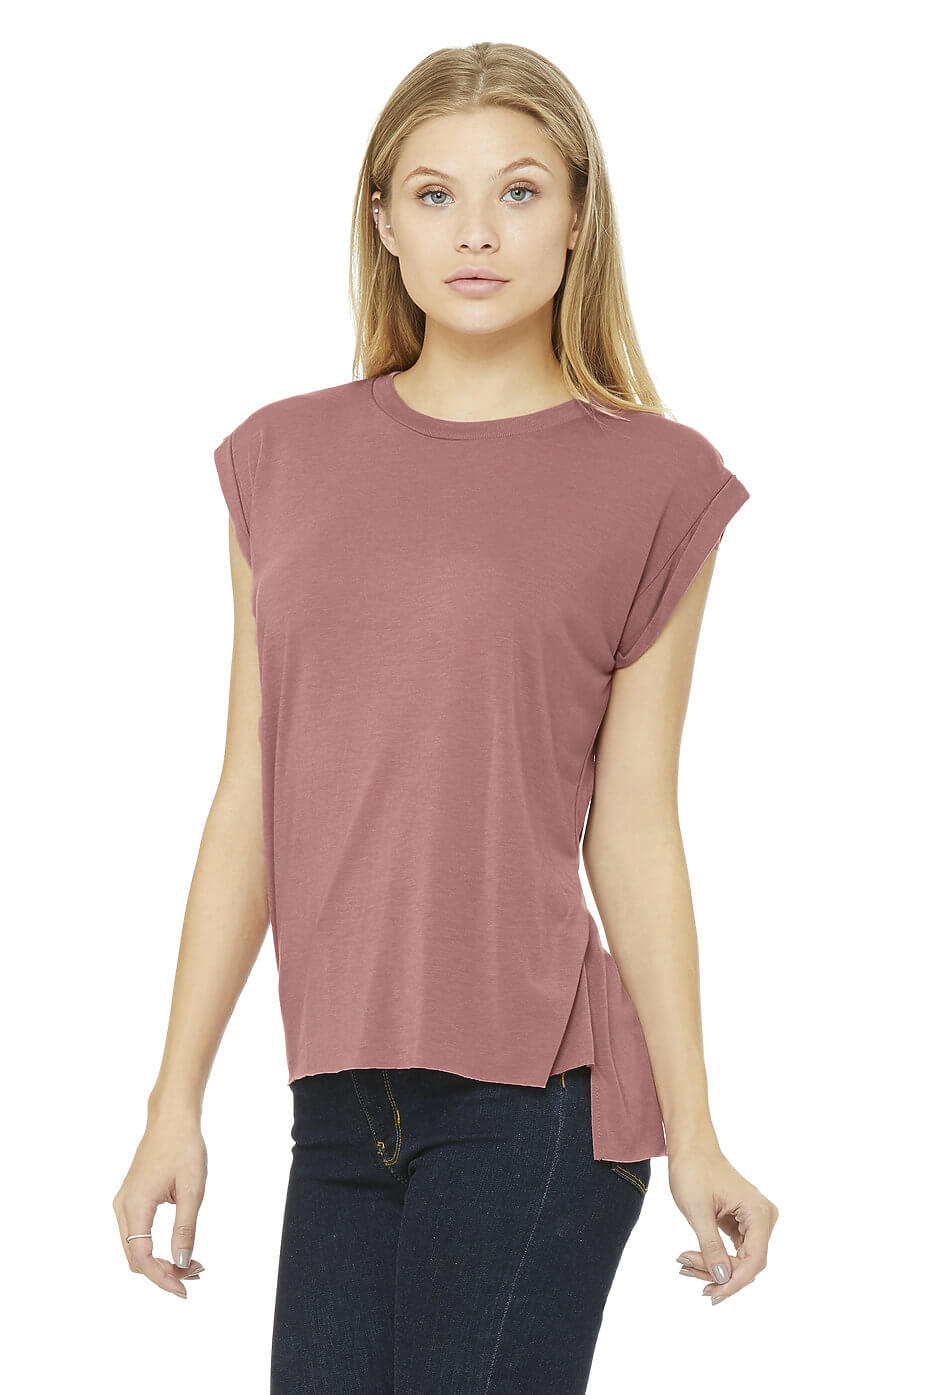 WOMEN'S FLOWY MUSCLE TEE WITH ROLLED CUFF